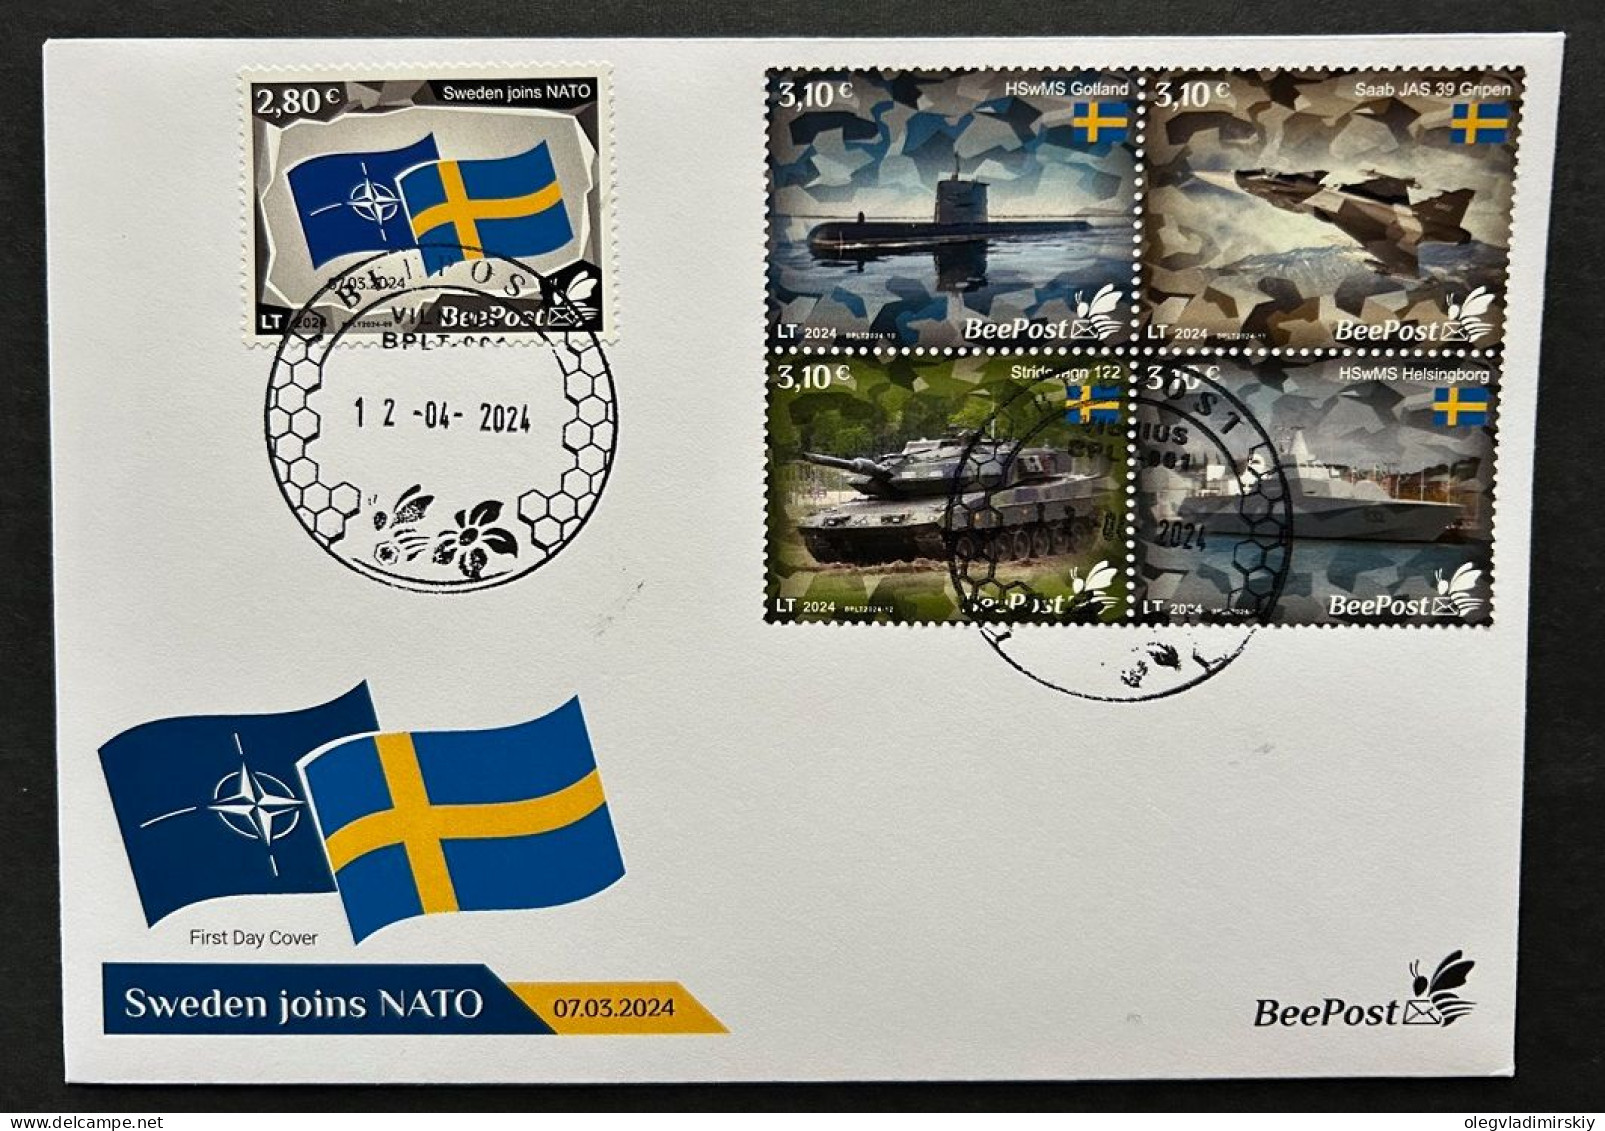 Lithuania 2024 Baltic - NATO Sea Sweden Joins NATO Tank Submarine Warship Airplane Flags BeePost Set Of 5 Stamps FDC - U-Boote